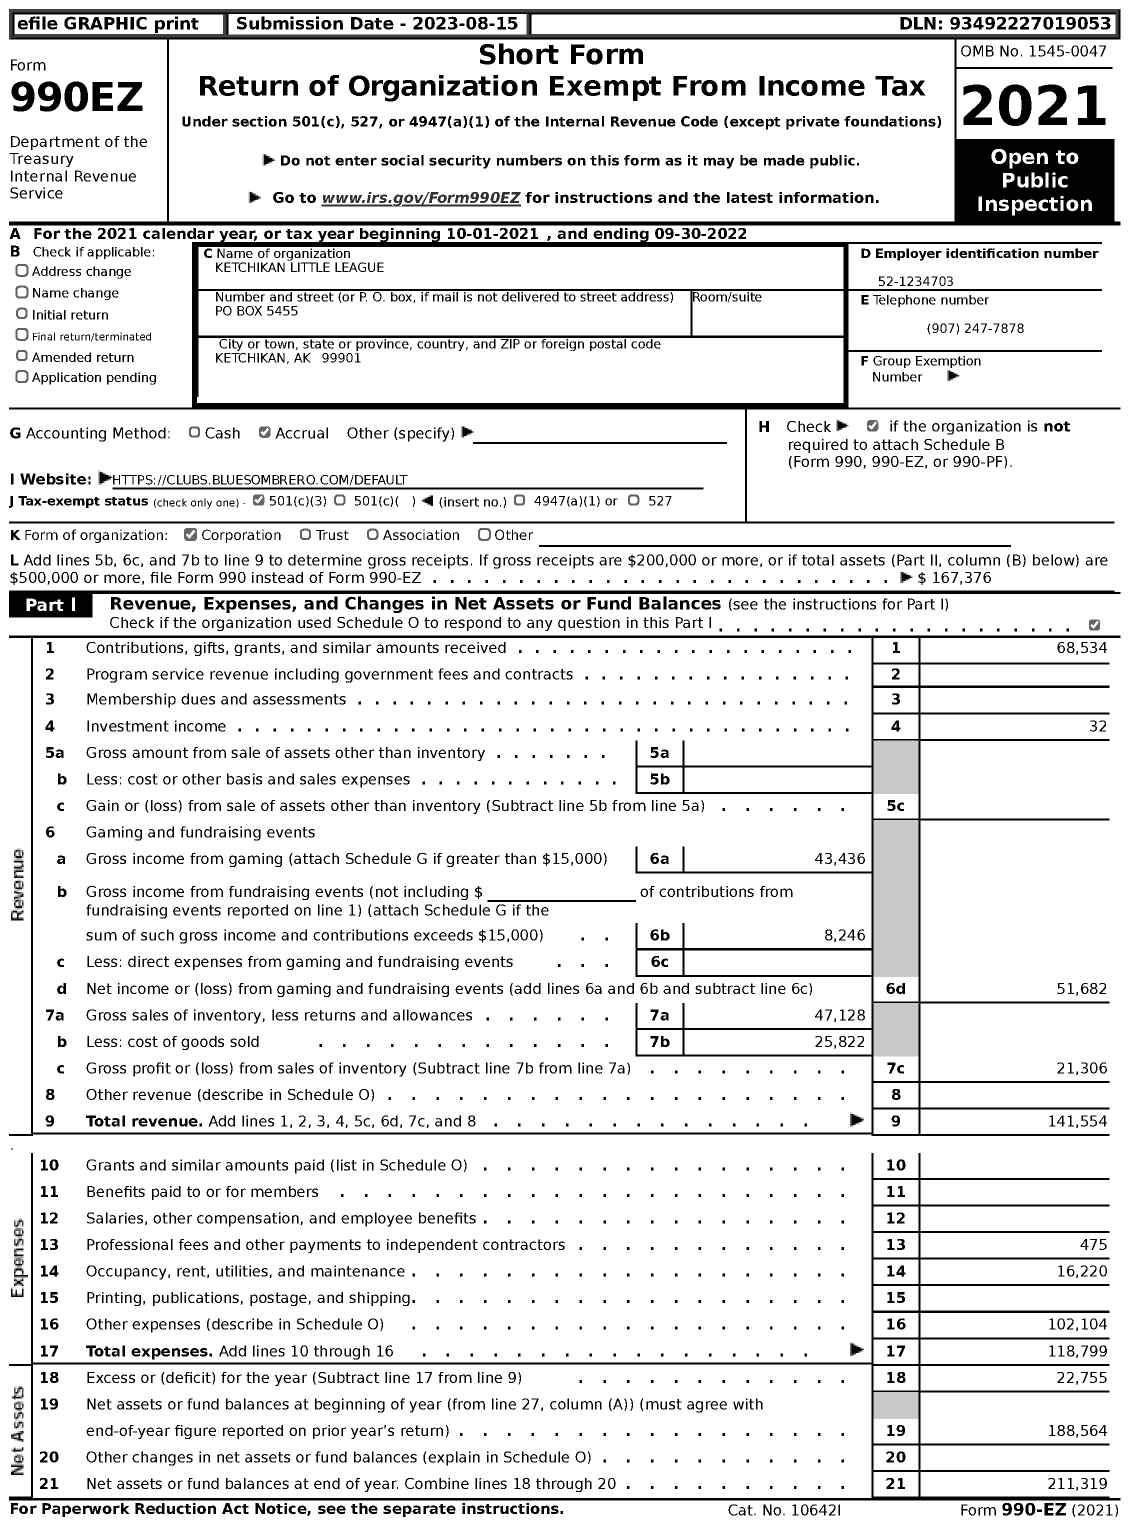 Image of first page of 2021 Form 990EZ for Little League Baseball - 4020208 Ketchikan LL